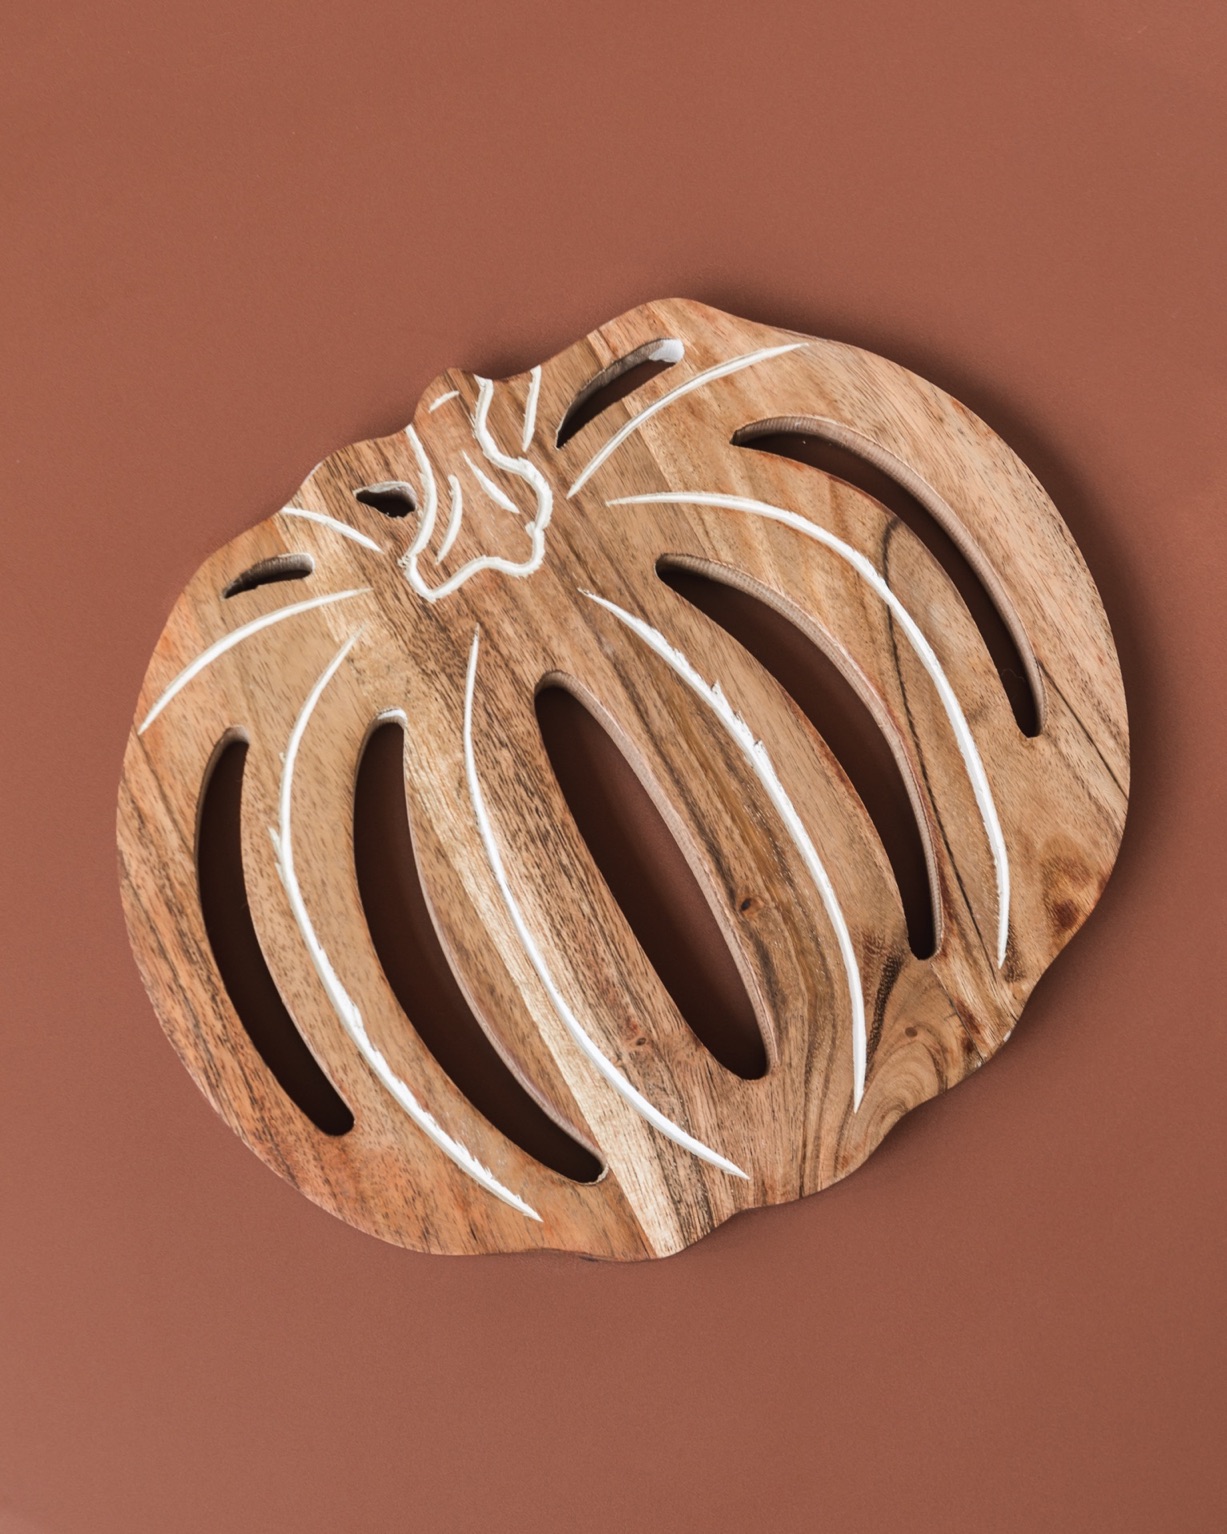 Pumpkin Trivet from India - Ethically Made from Sustainable Acacia Wood